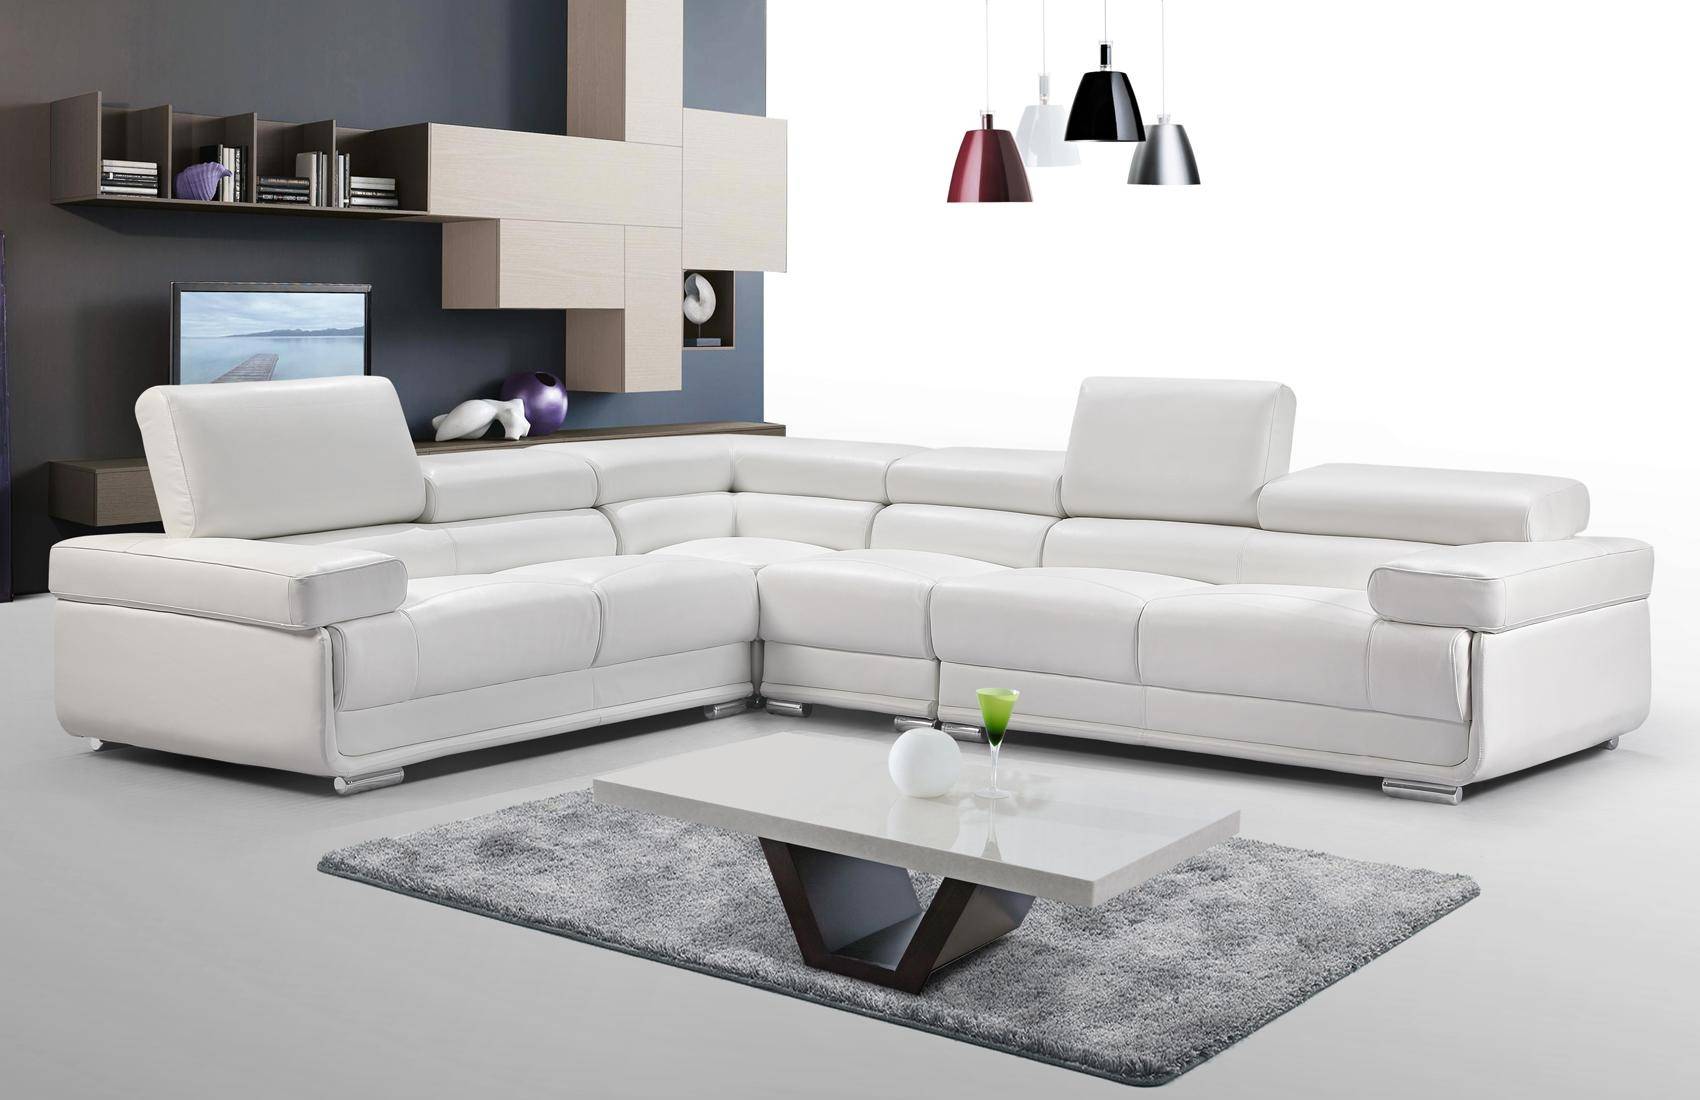 Esf 2119 Sectional Sofa In White, Modern White Leather Sectional With Chaise